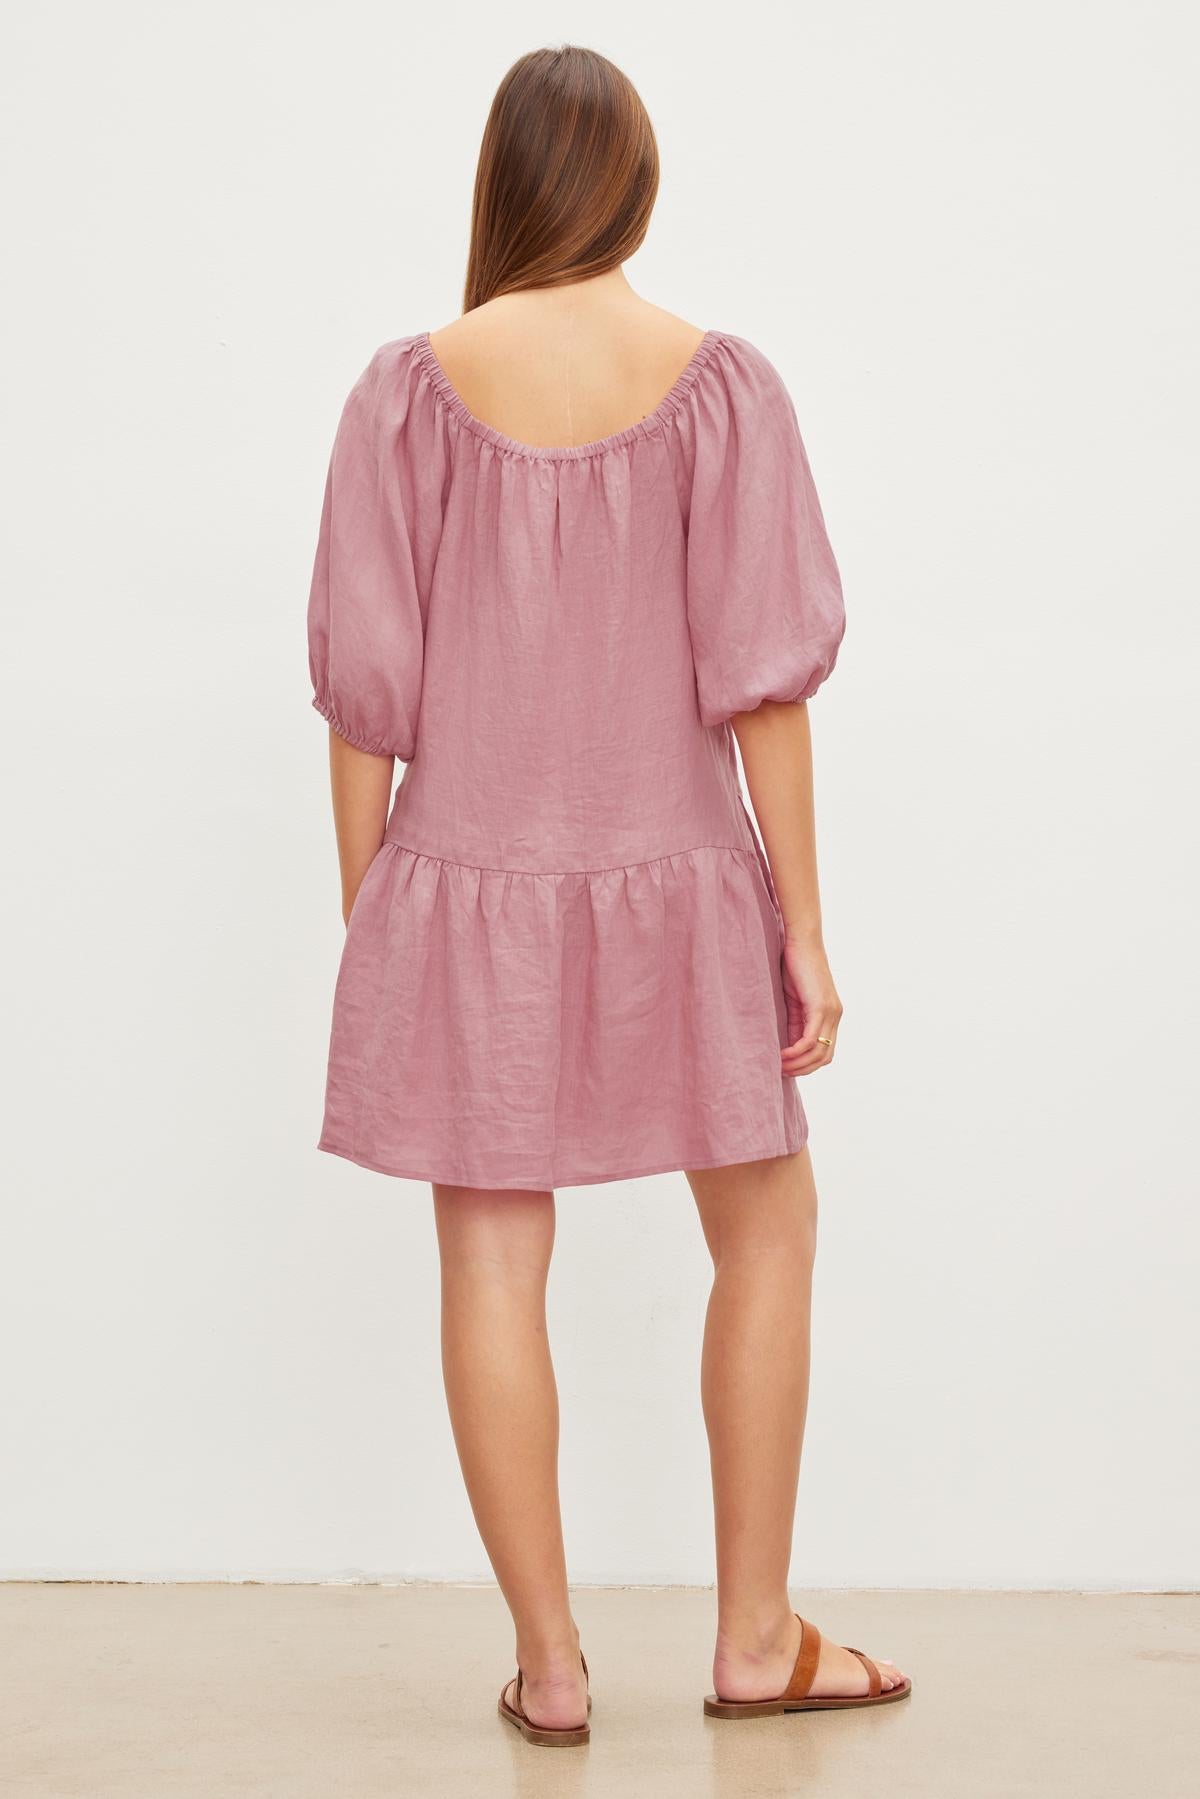 Woman viewed from behind wearing a pink, off-the-shoulder IRINA LINEN TIERED DRESS by Velvet by Graham & Spencer, with a ruffled hem and elastic neckline, standing against a plain background.-36571205435585